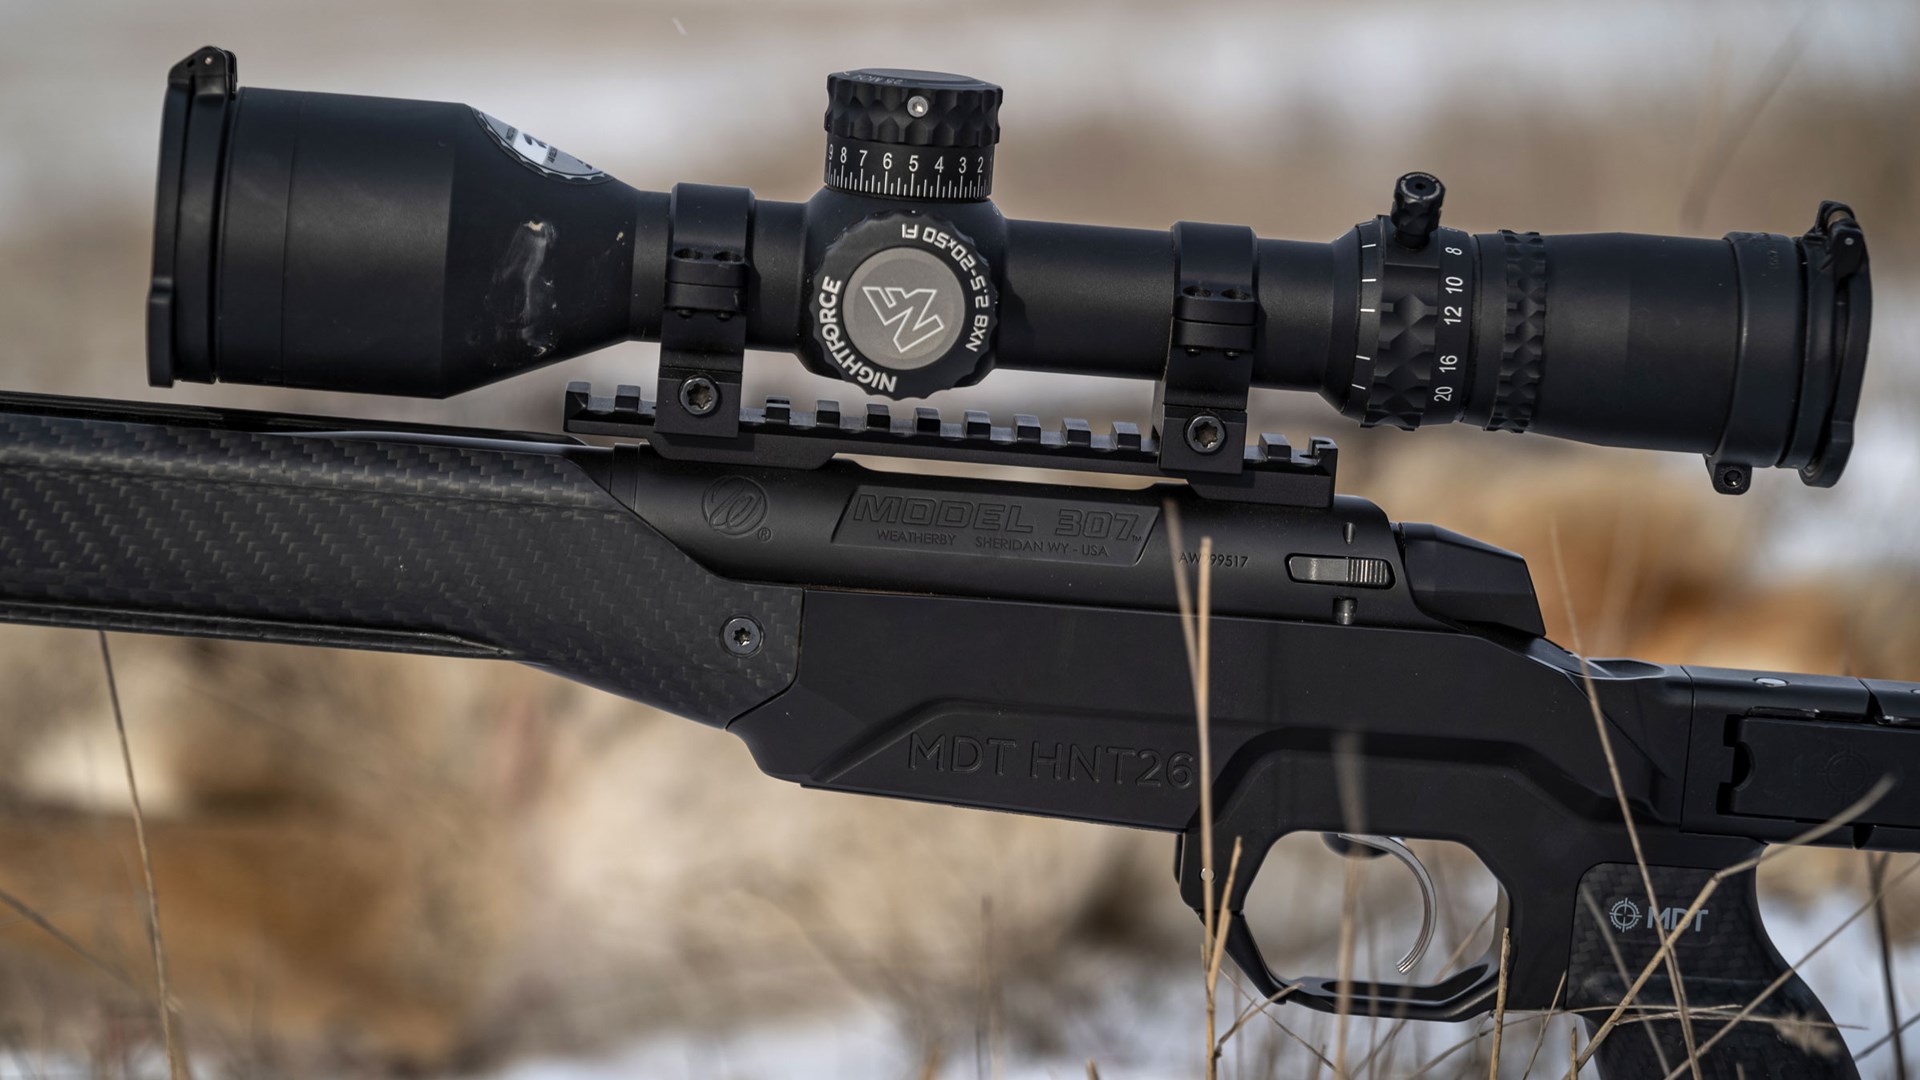 Left side of a Weatherby 307 series rifle with a Nightforce scope mounted.